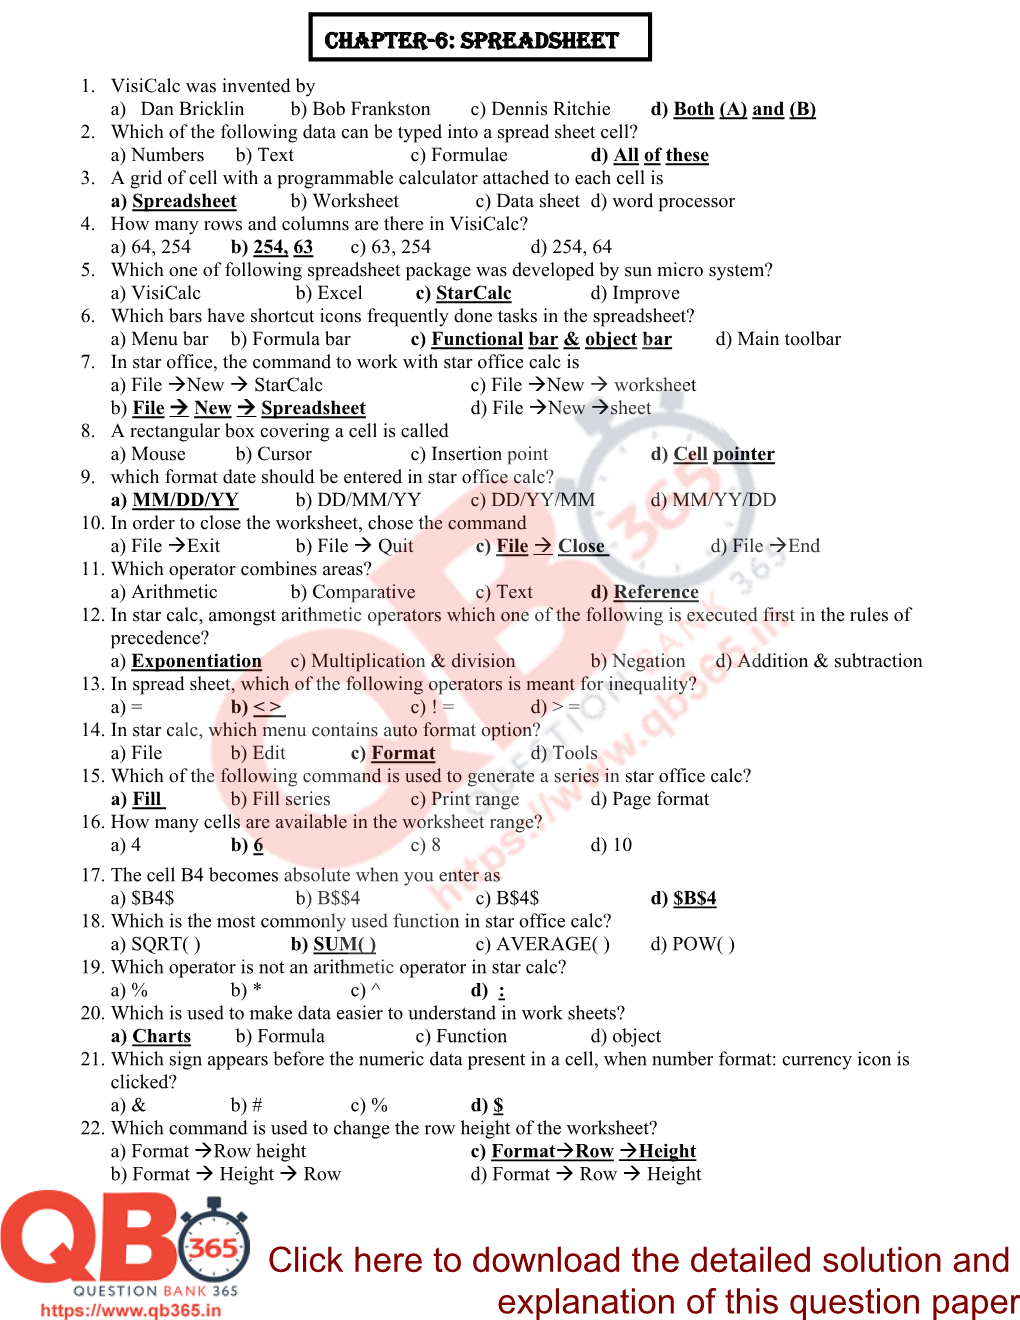 To Download the Detailed Solution and Explanation of This Question Paper 23